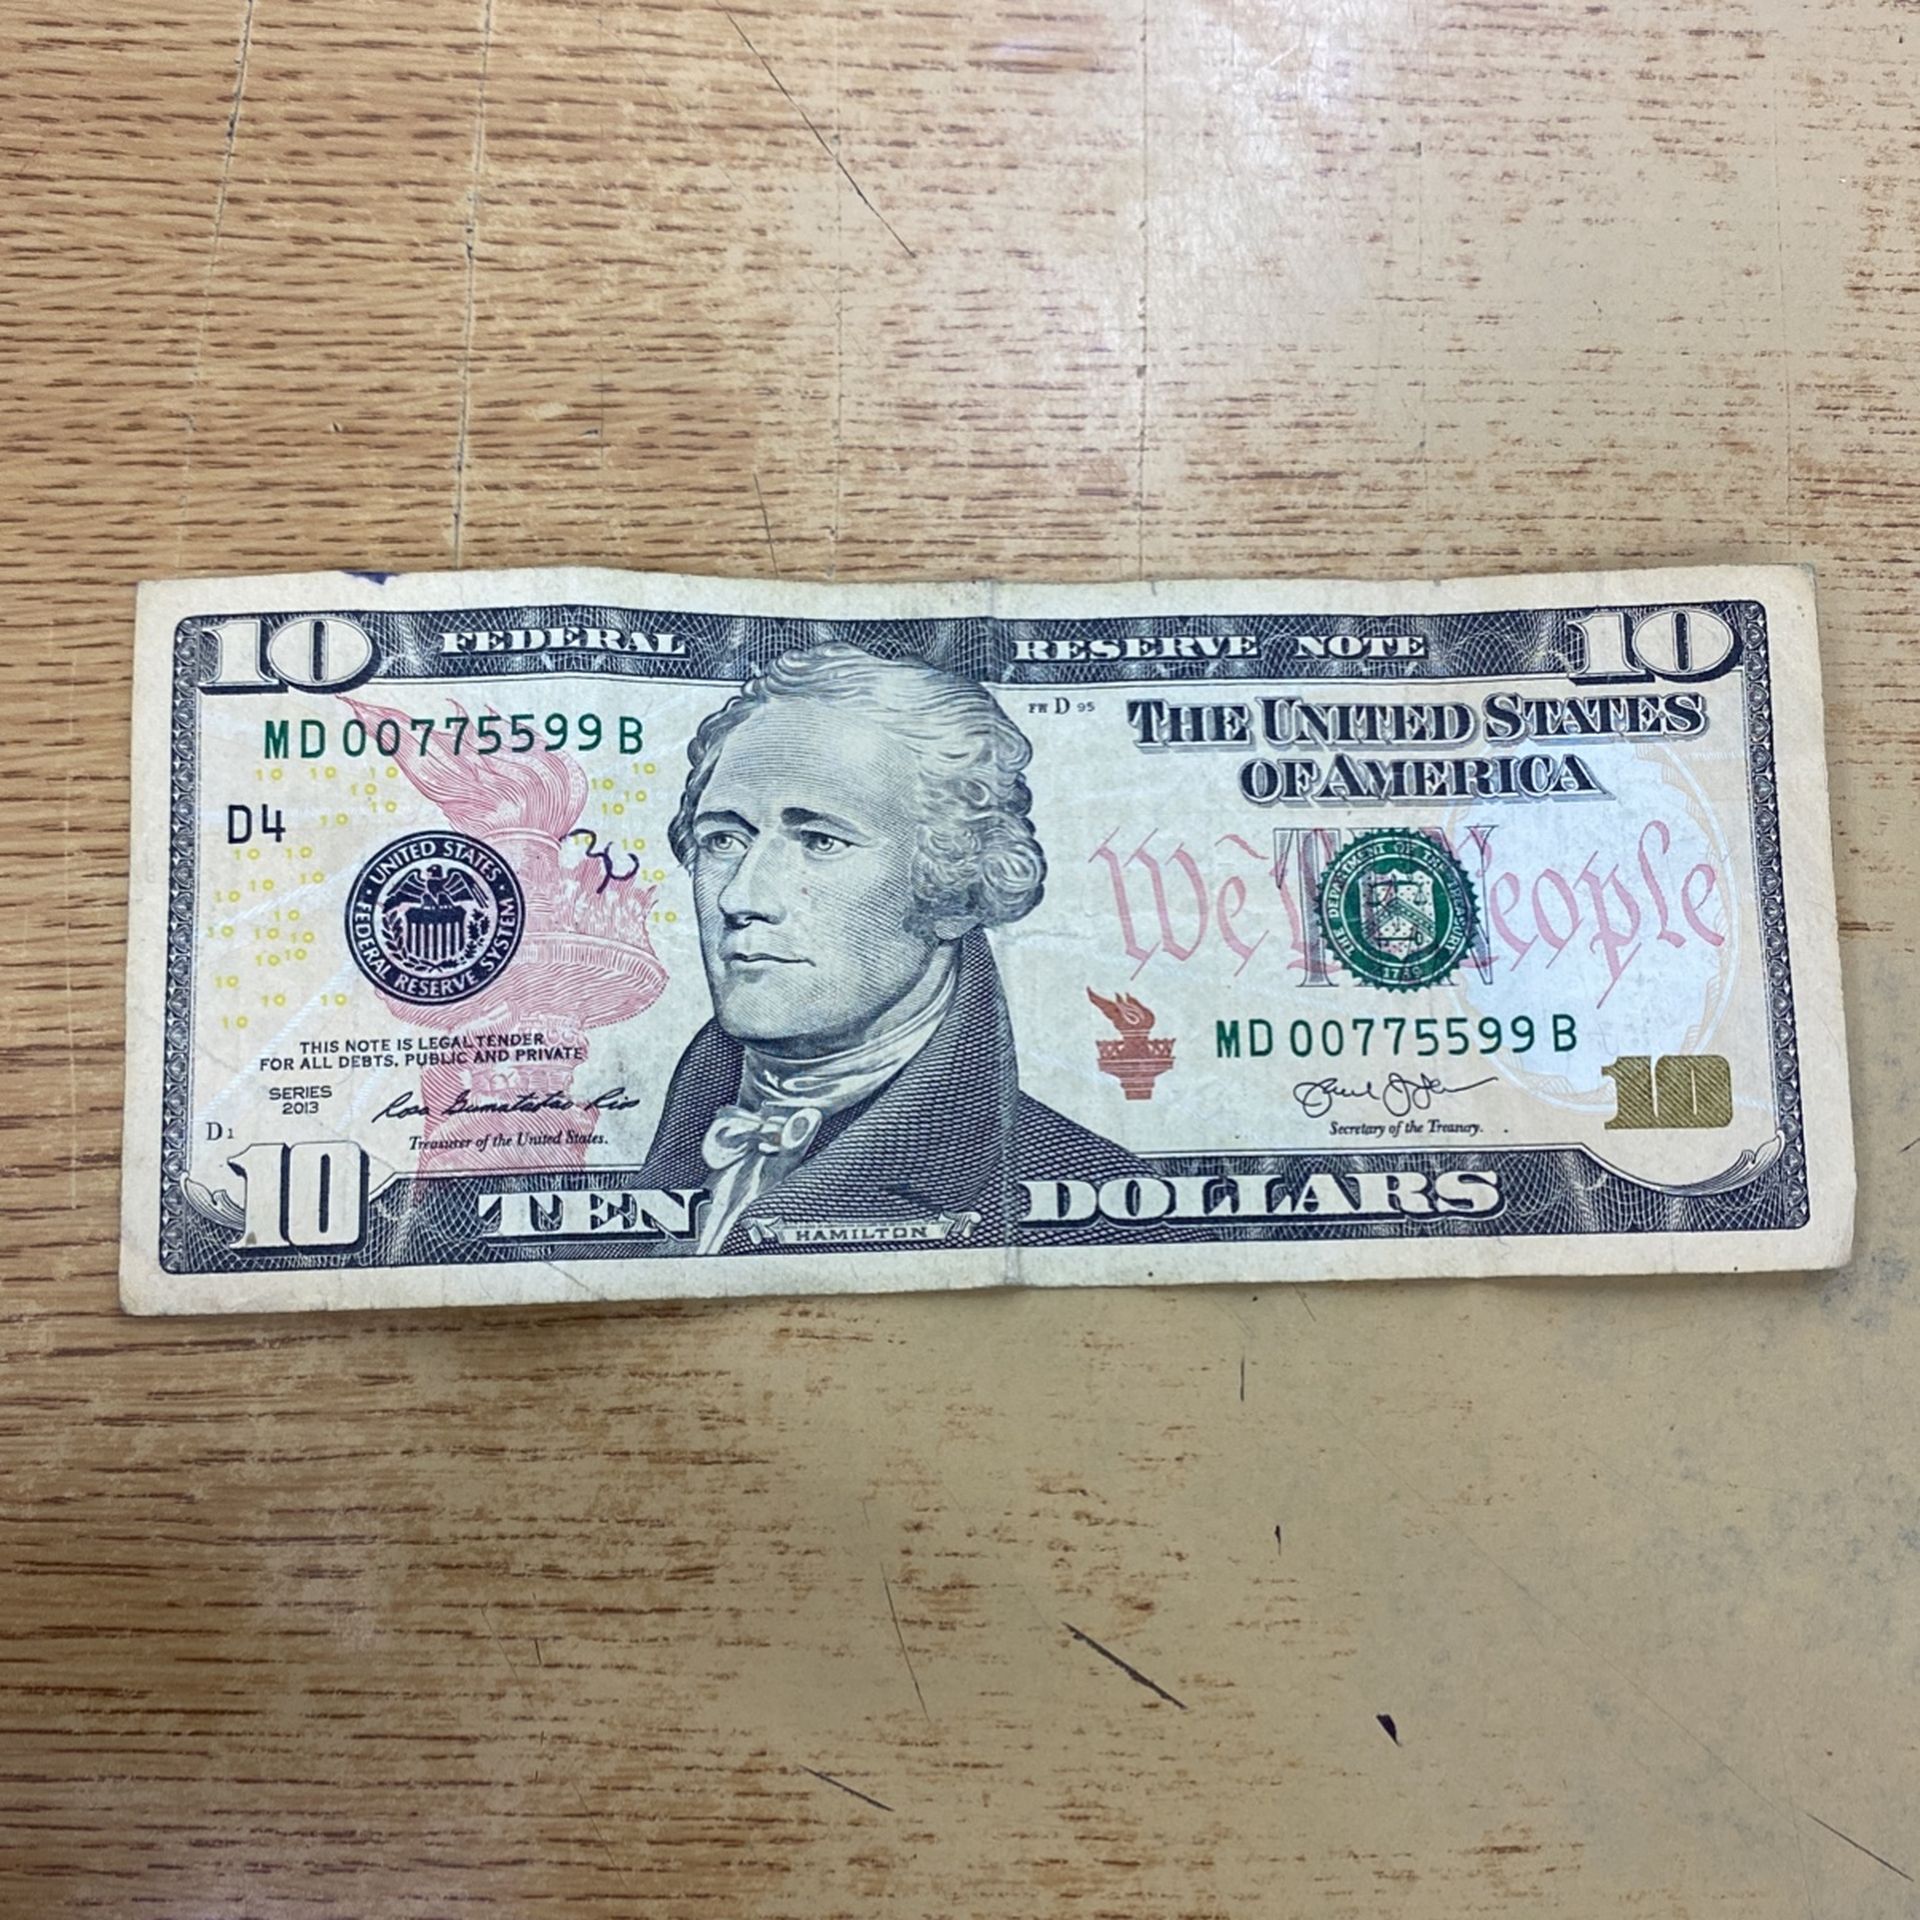 2013 $10 Bill With Funny Serial Number $18